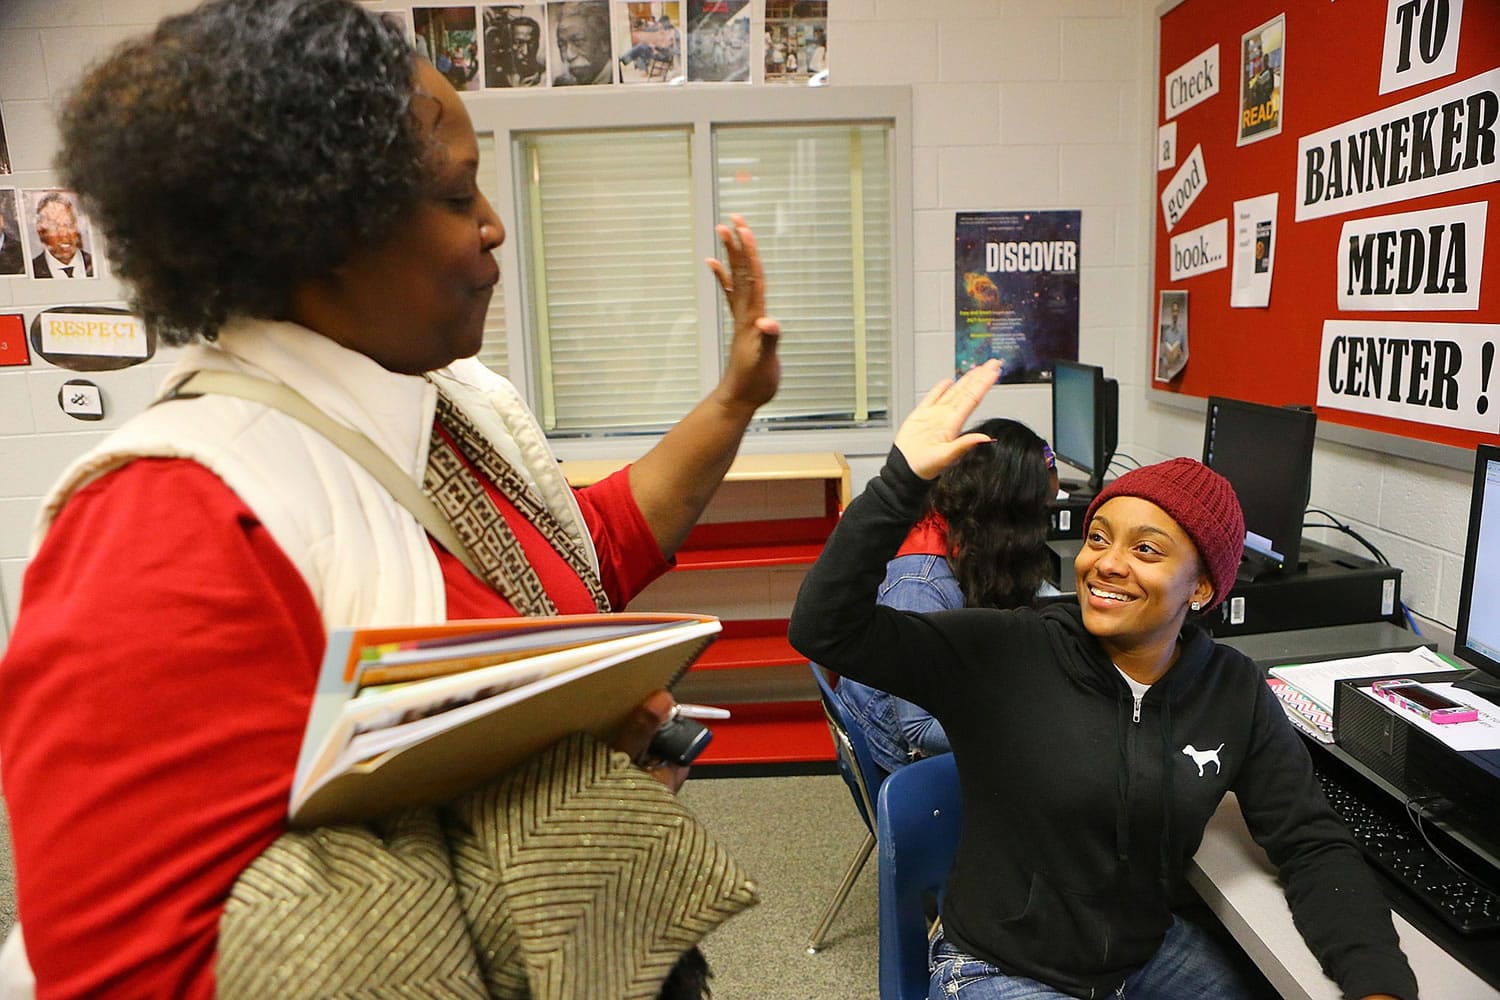 Curtis Compton/Atlanta Journal-Constitution
Glenda Shivers, left, gets a high five from her niece Summer McMath, 18, after helping her complete her financial aid form during a financial aid workshop in College Park, Ga.